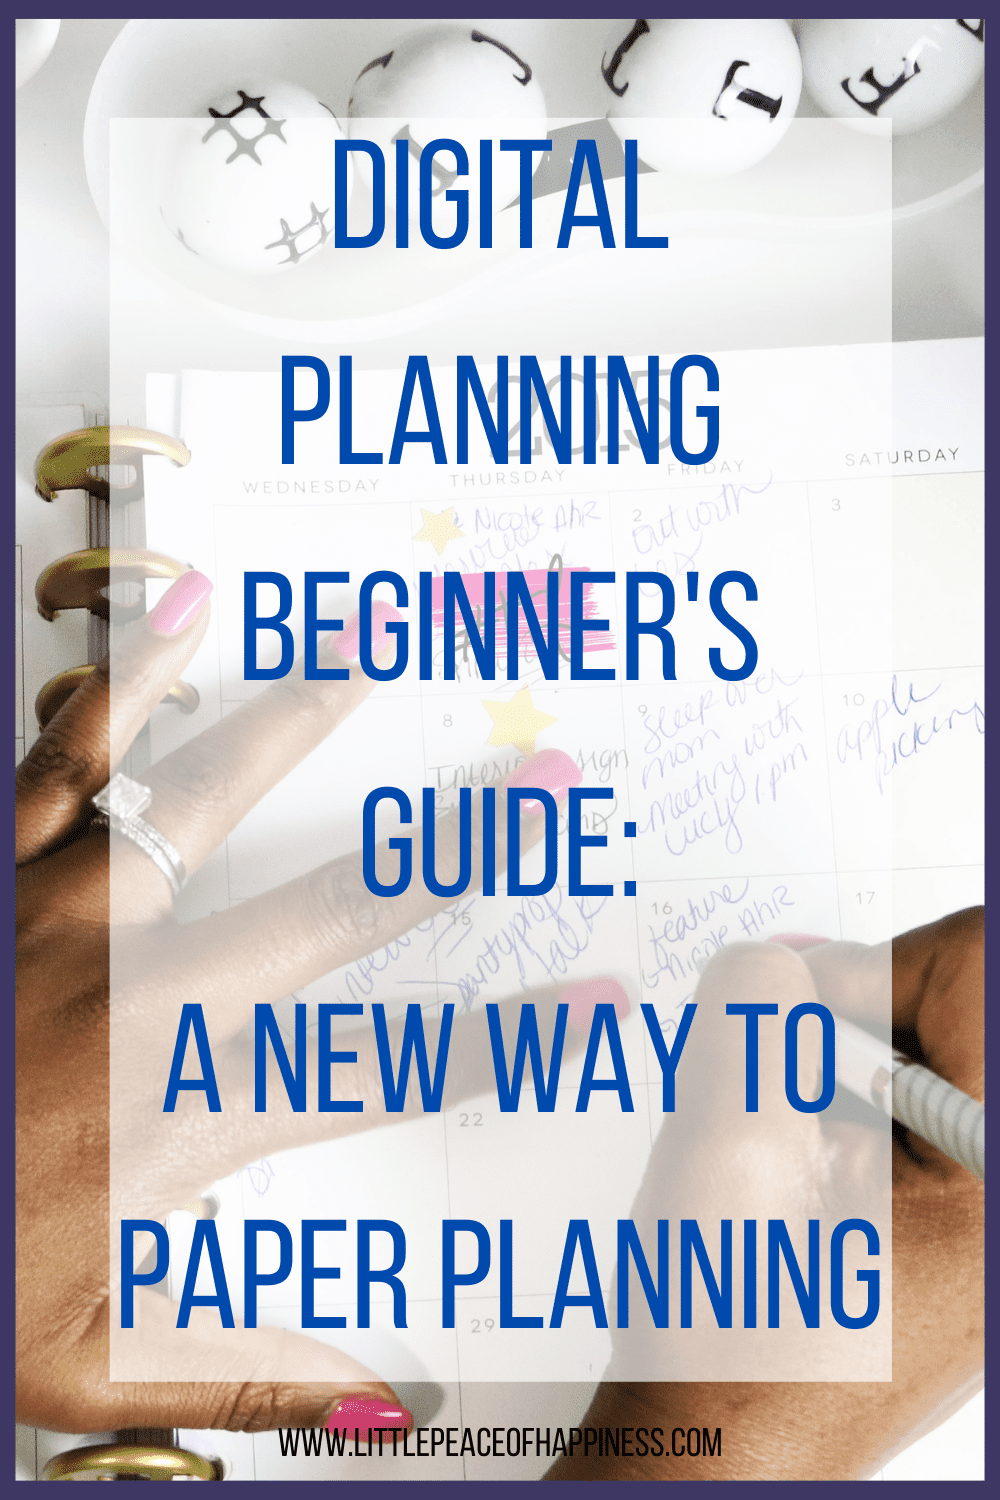 How to use Digital Planner for beginners